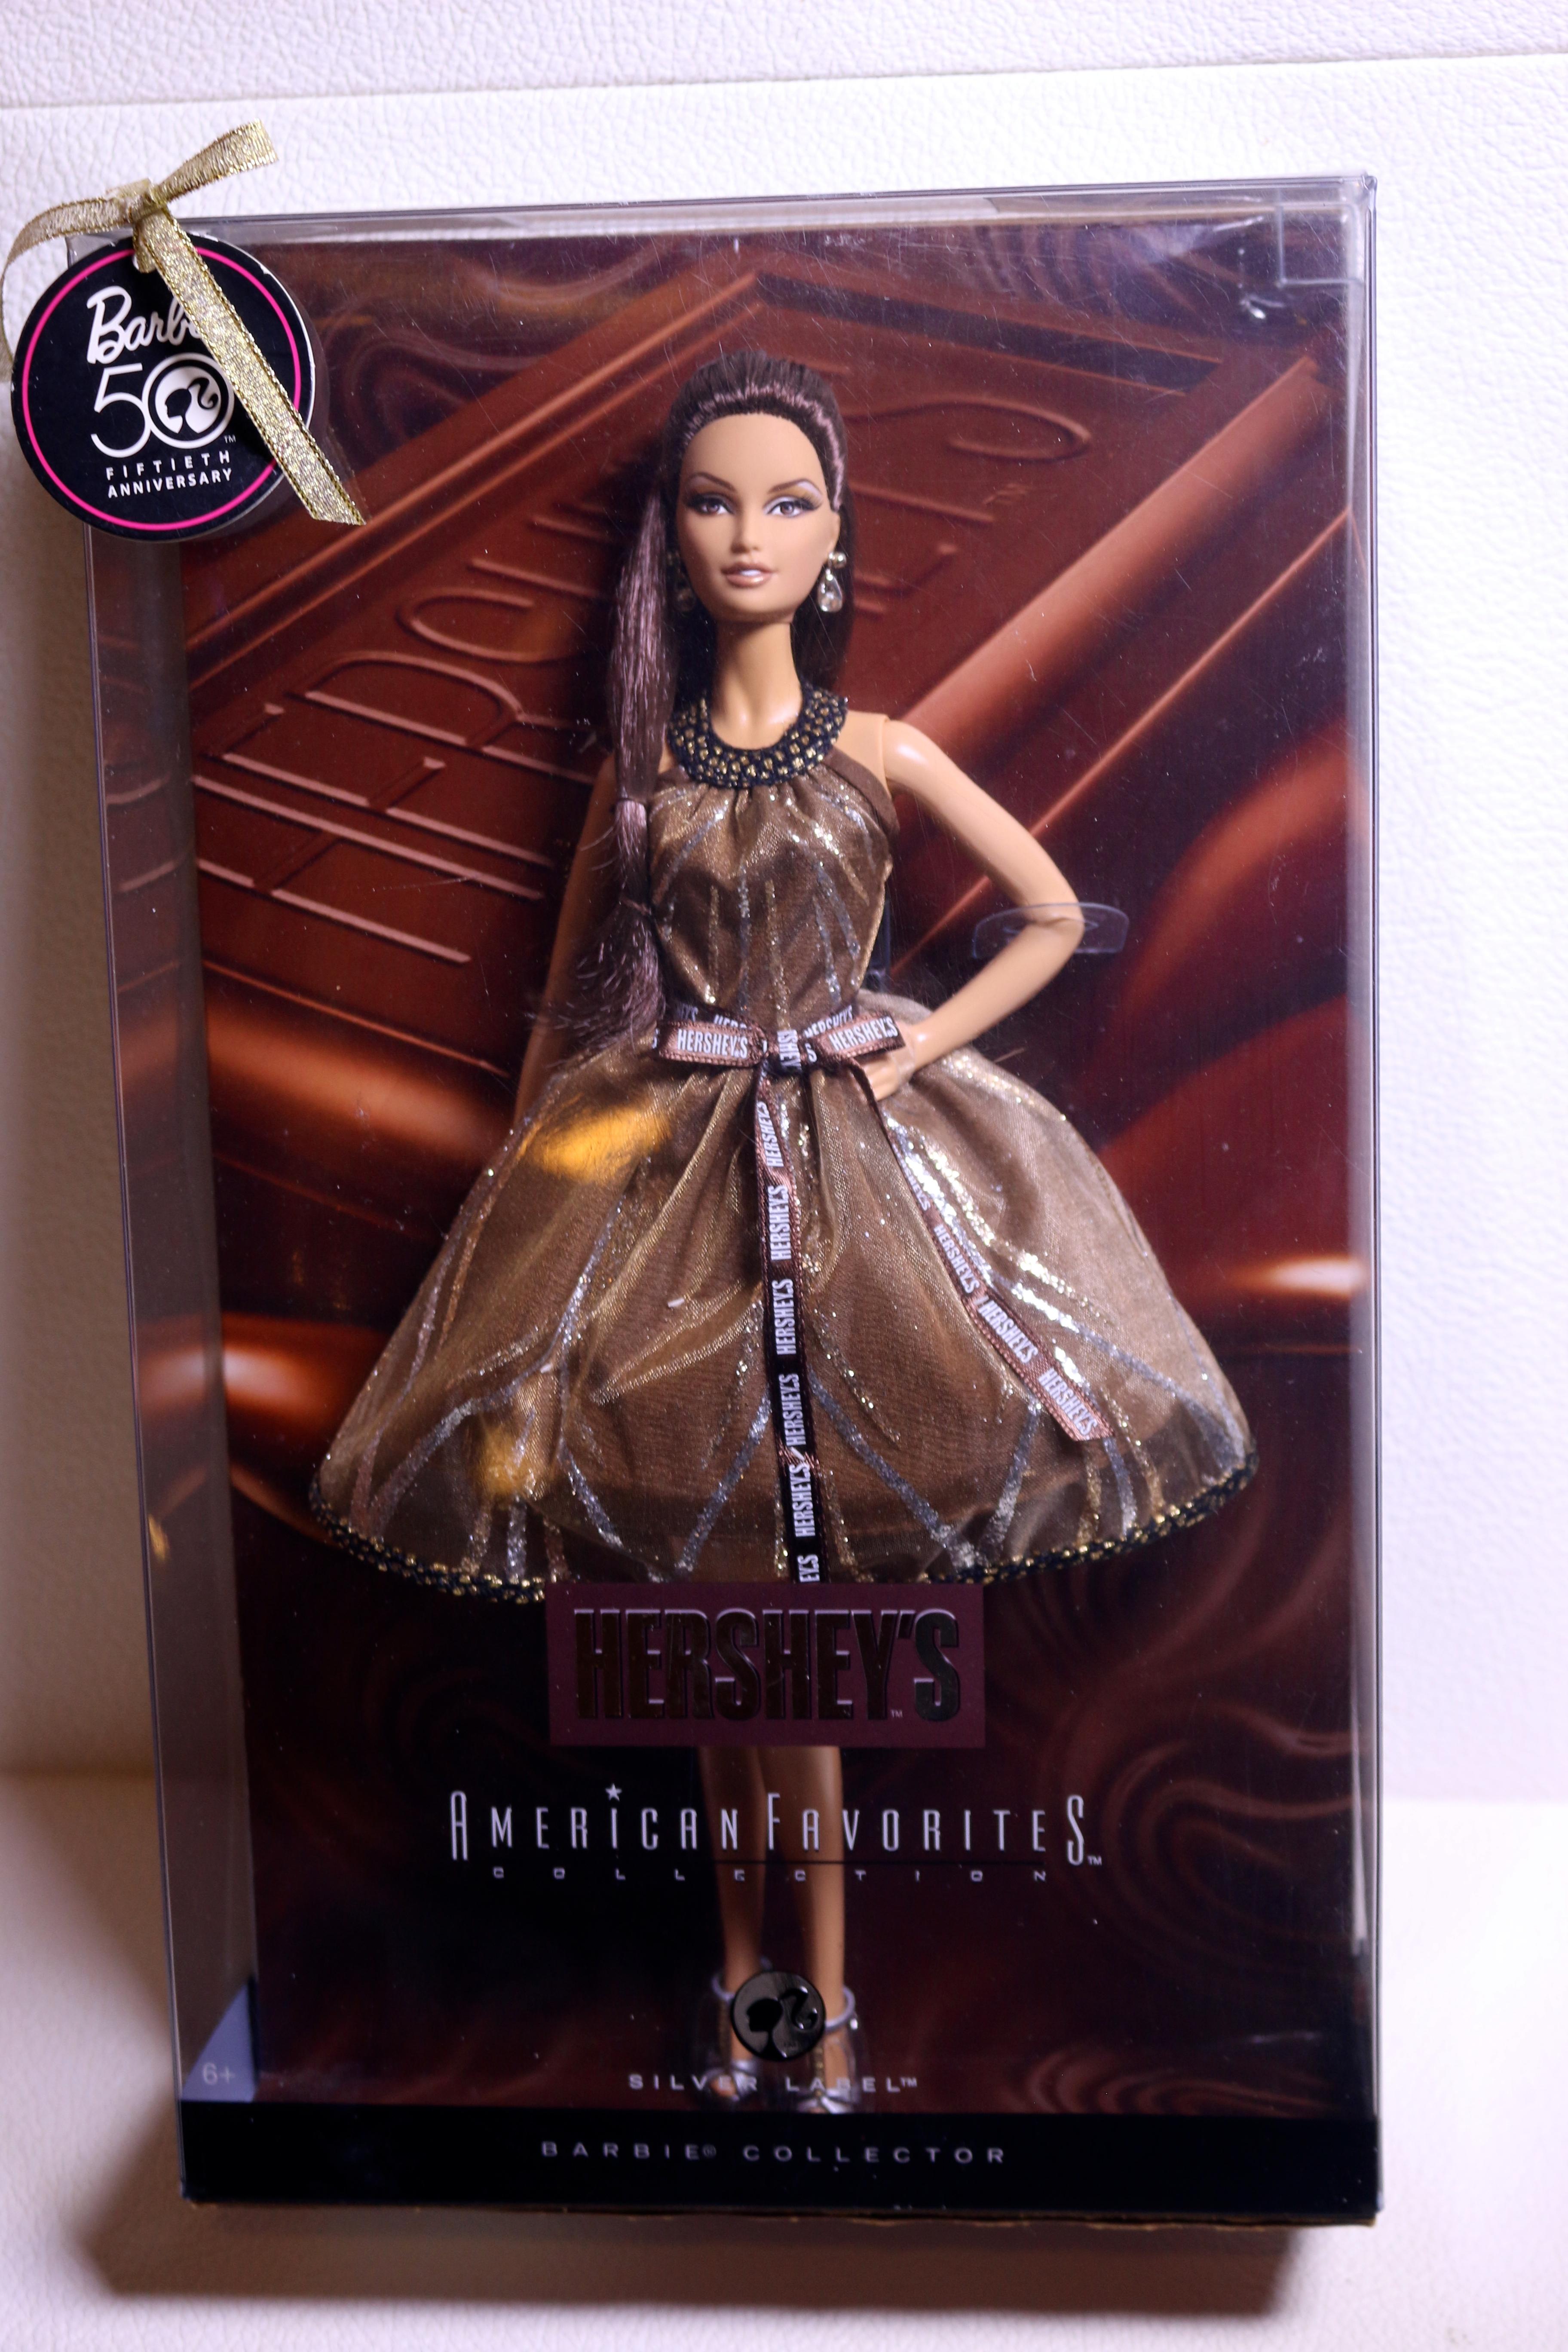 Hershey's being one of the iconic American brands, Barbie embodies its brand spirit. 2009 American Favorites collection Hershey's Barbie is a doll specially designed for chocolate lovers. The Barbie doll looks stylish in a brown mocha cocktail dress